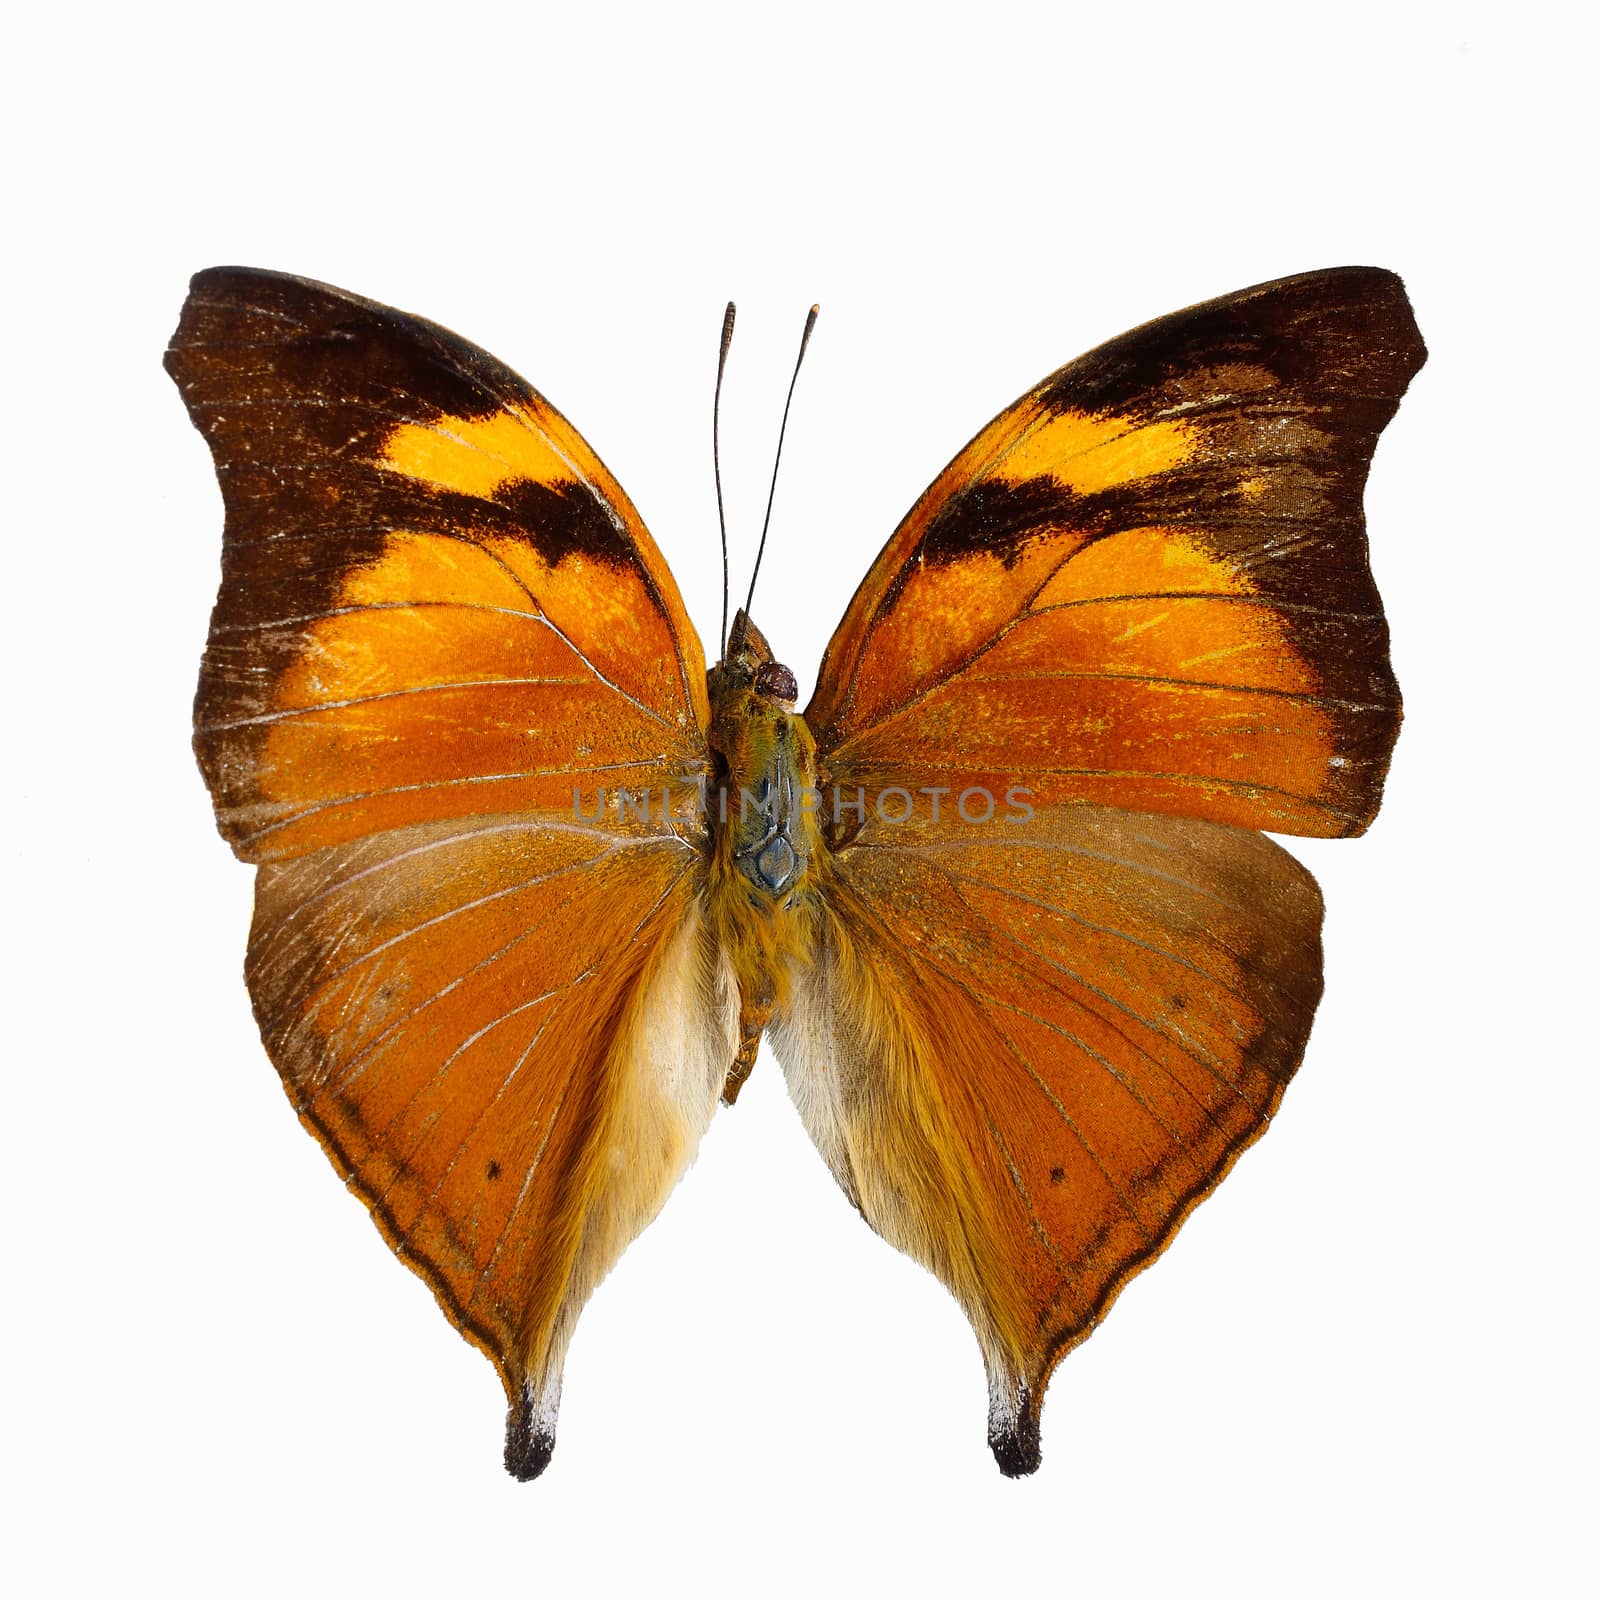 Orange butterfly, Autumn Leaf butterfly, Nymphalid butterfly (Doleschallia bisaltide), isolated on white background